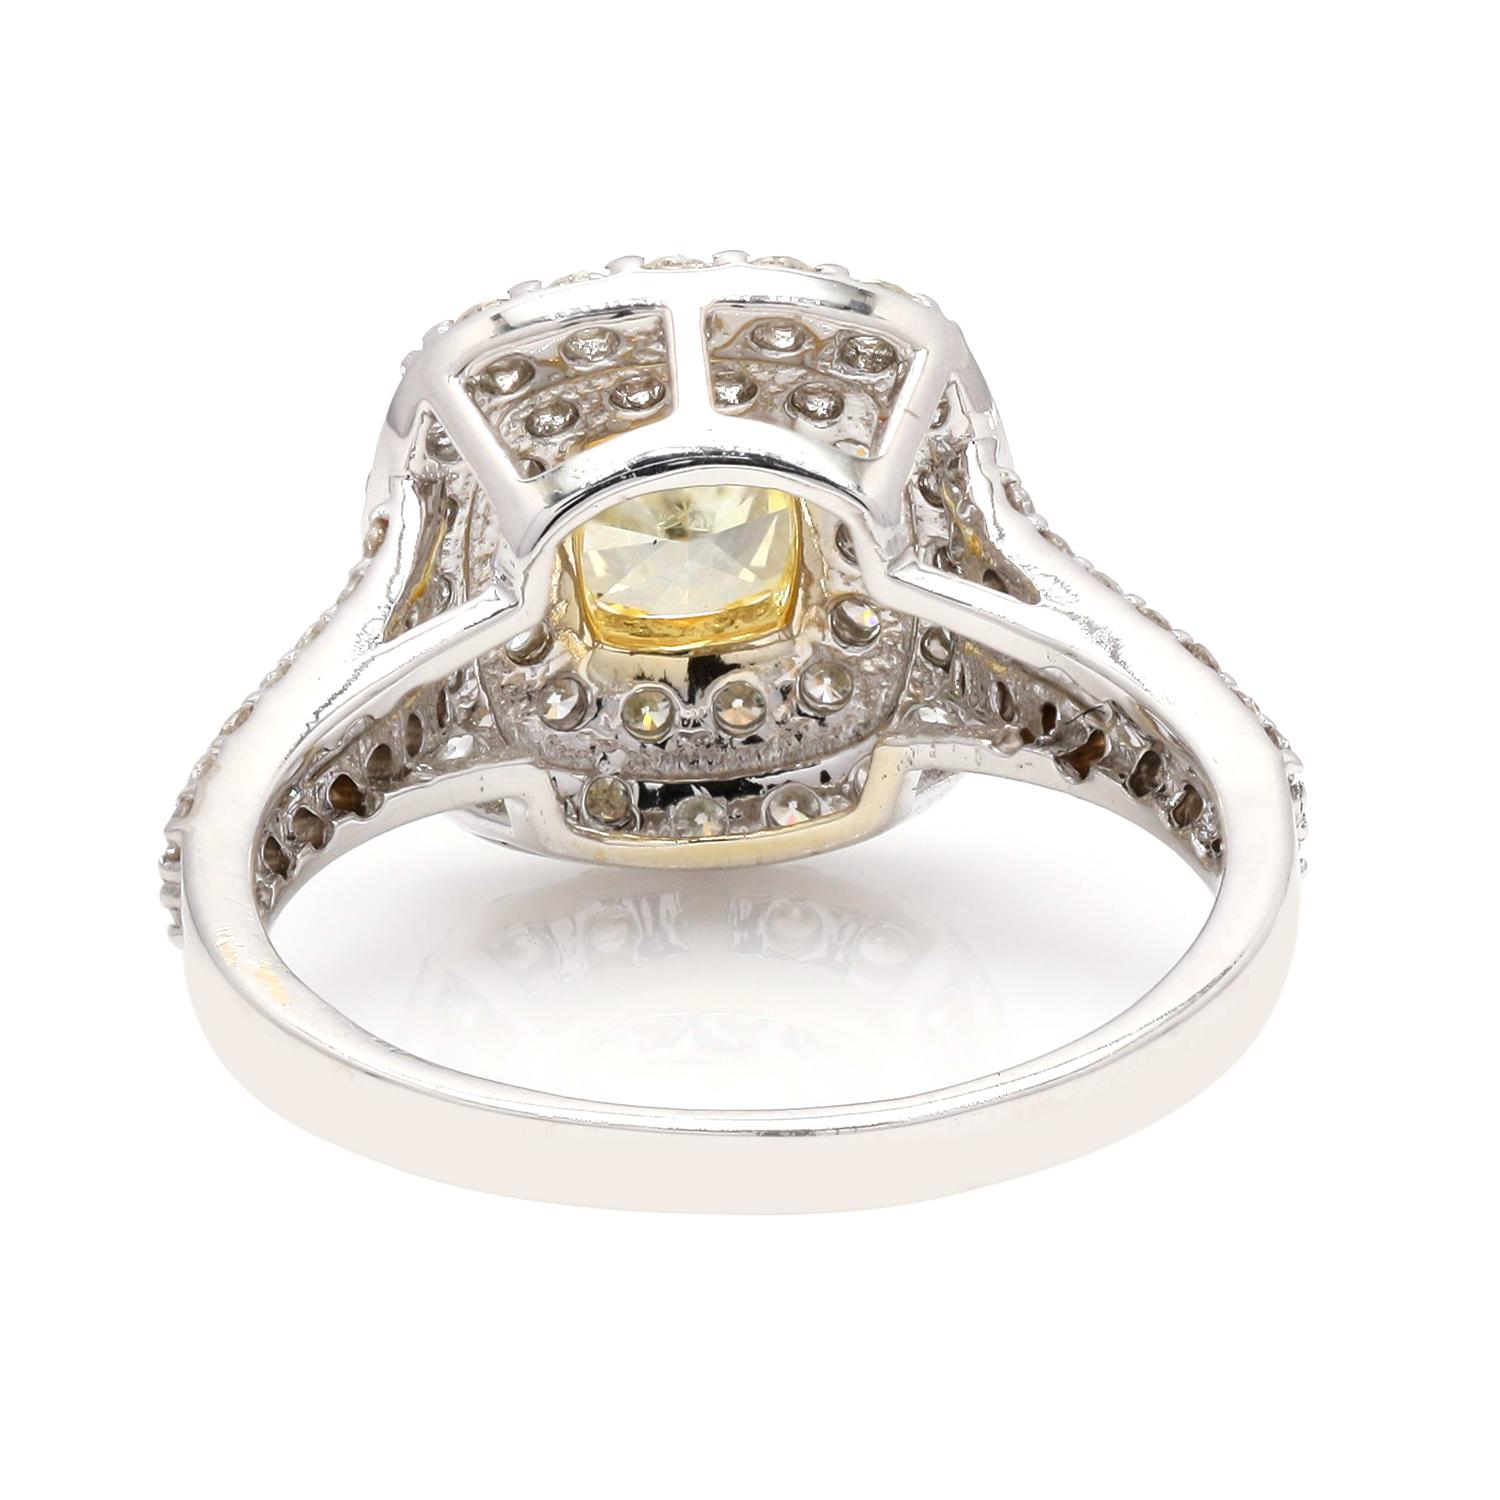 Cushion Cut Yellow Diamond Engagement Ring & Halo Diamond Setting in 18k Gold In New Condition For Sale In New York, NY